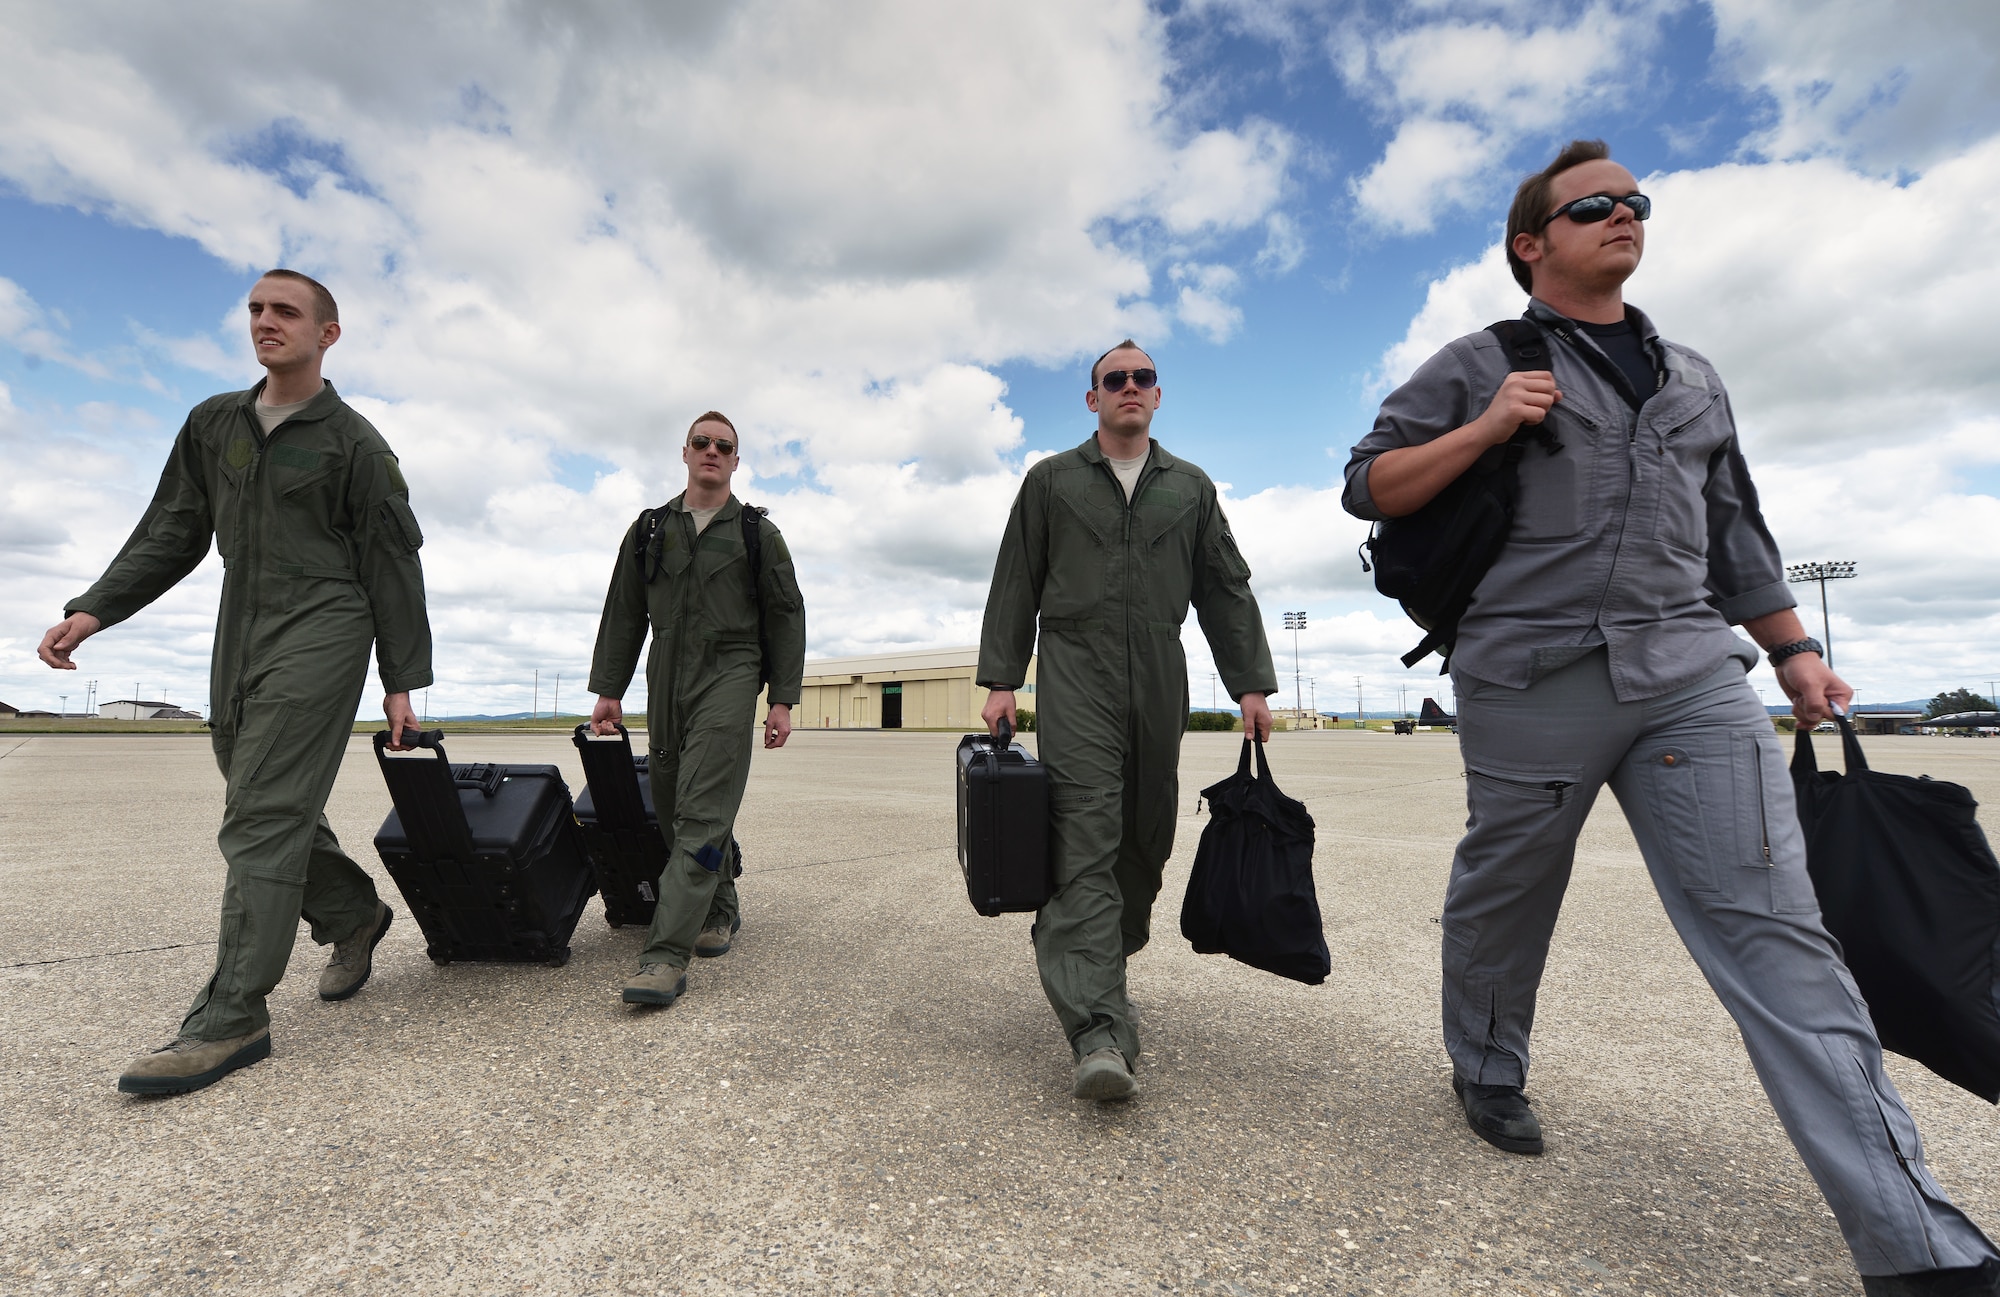 Tactical systems operators and students assigned to the 306th Intelligence Squadron walk out to a C-12 King Air aircraft in preparation for a training sortie at Beale Air Force Base, Calif., April 5, 2013. (U.S. Air Force photo by Airman 1st Class Drew Buchanan/Released)